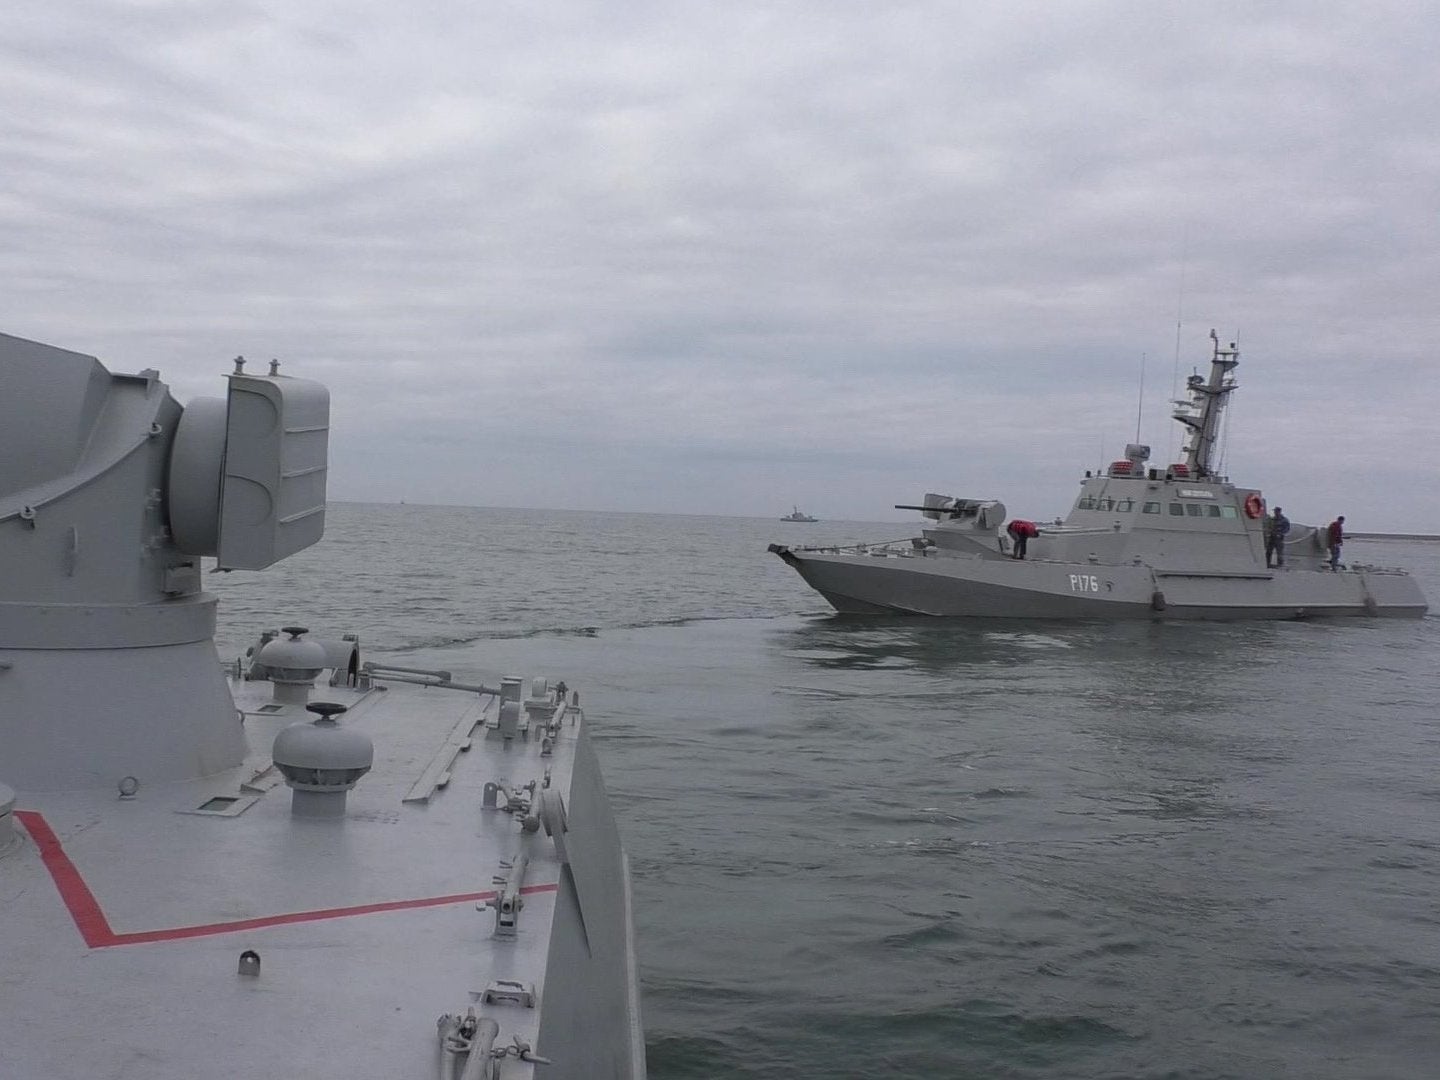 A Russian coast guard ship appears to have rammed a Ukrainian Navy tugboat just off the Crimean peninsula